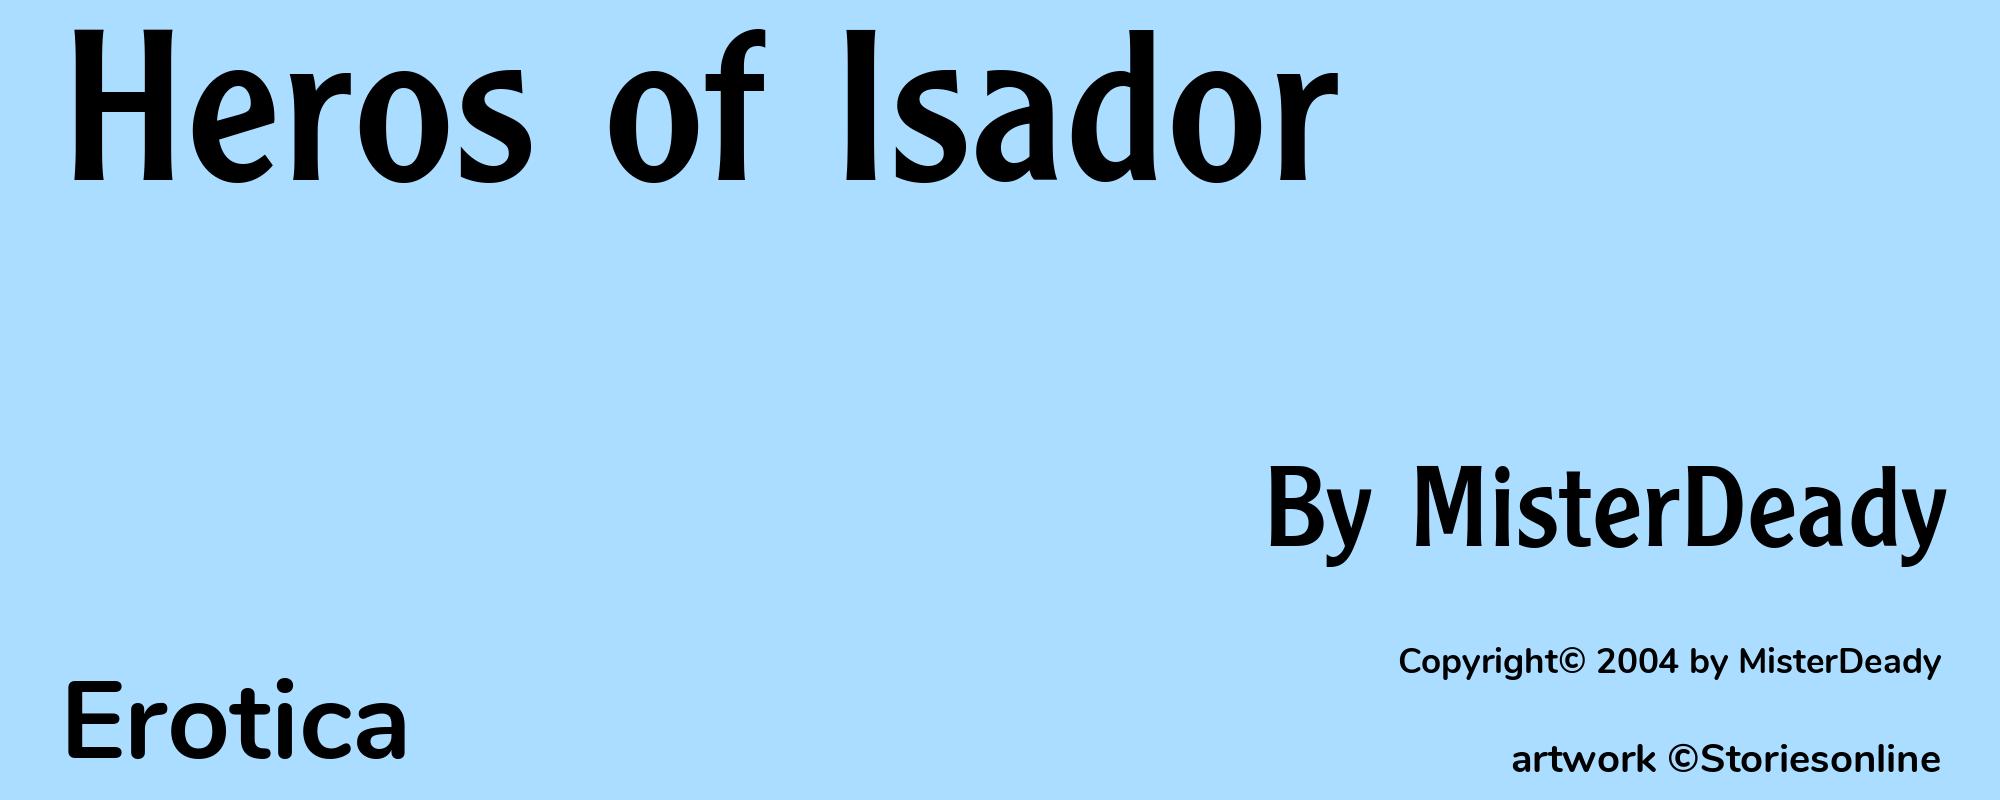 Heros of Isador - Cover